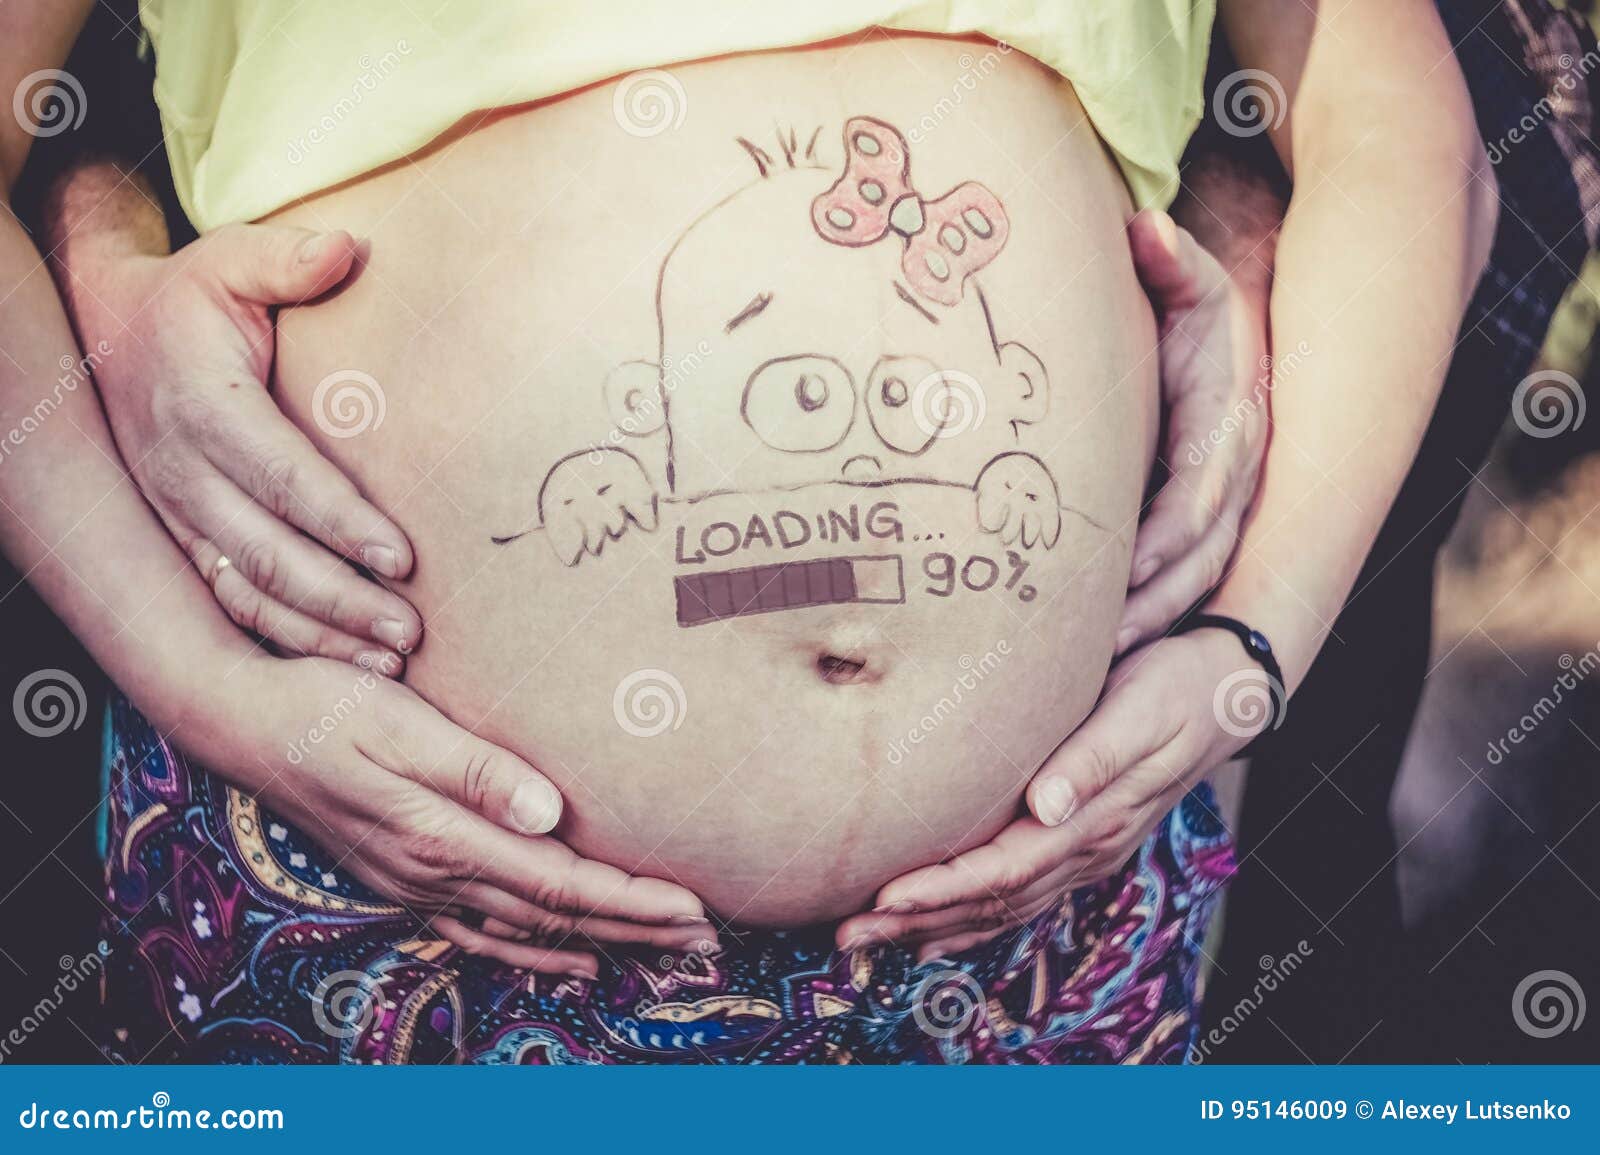 Pregnant Woman Belly Stock Image Image Of Girl Body 95146009